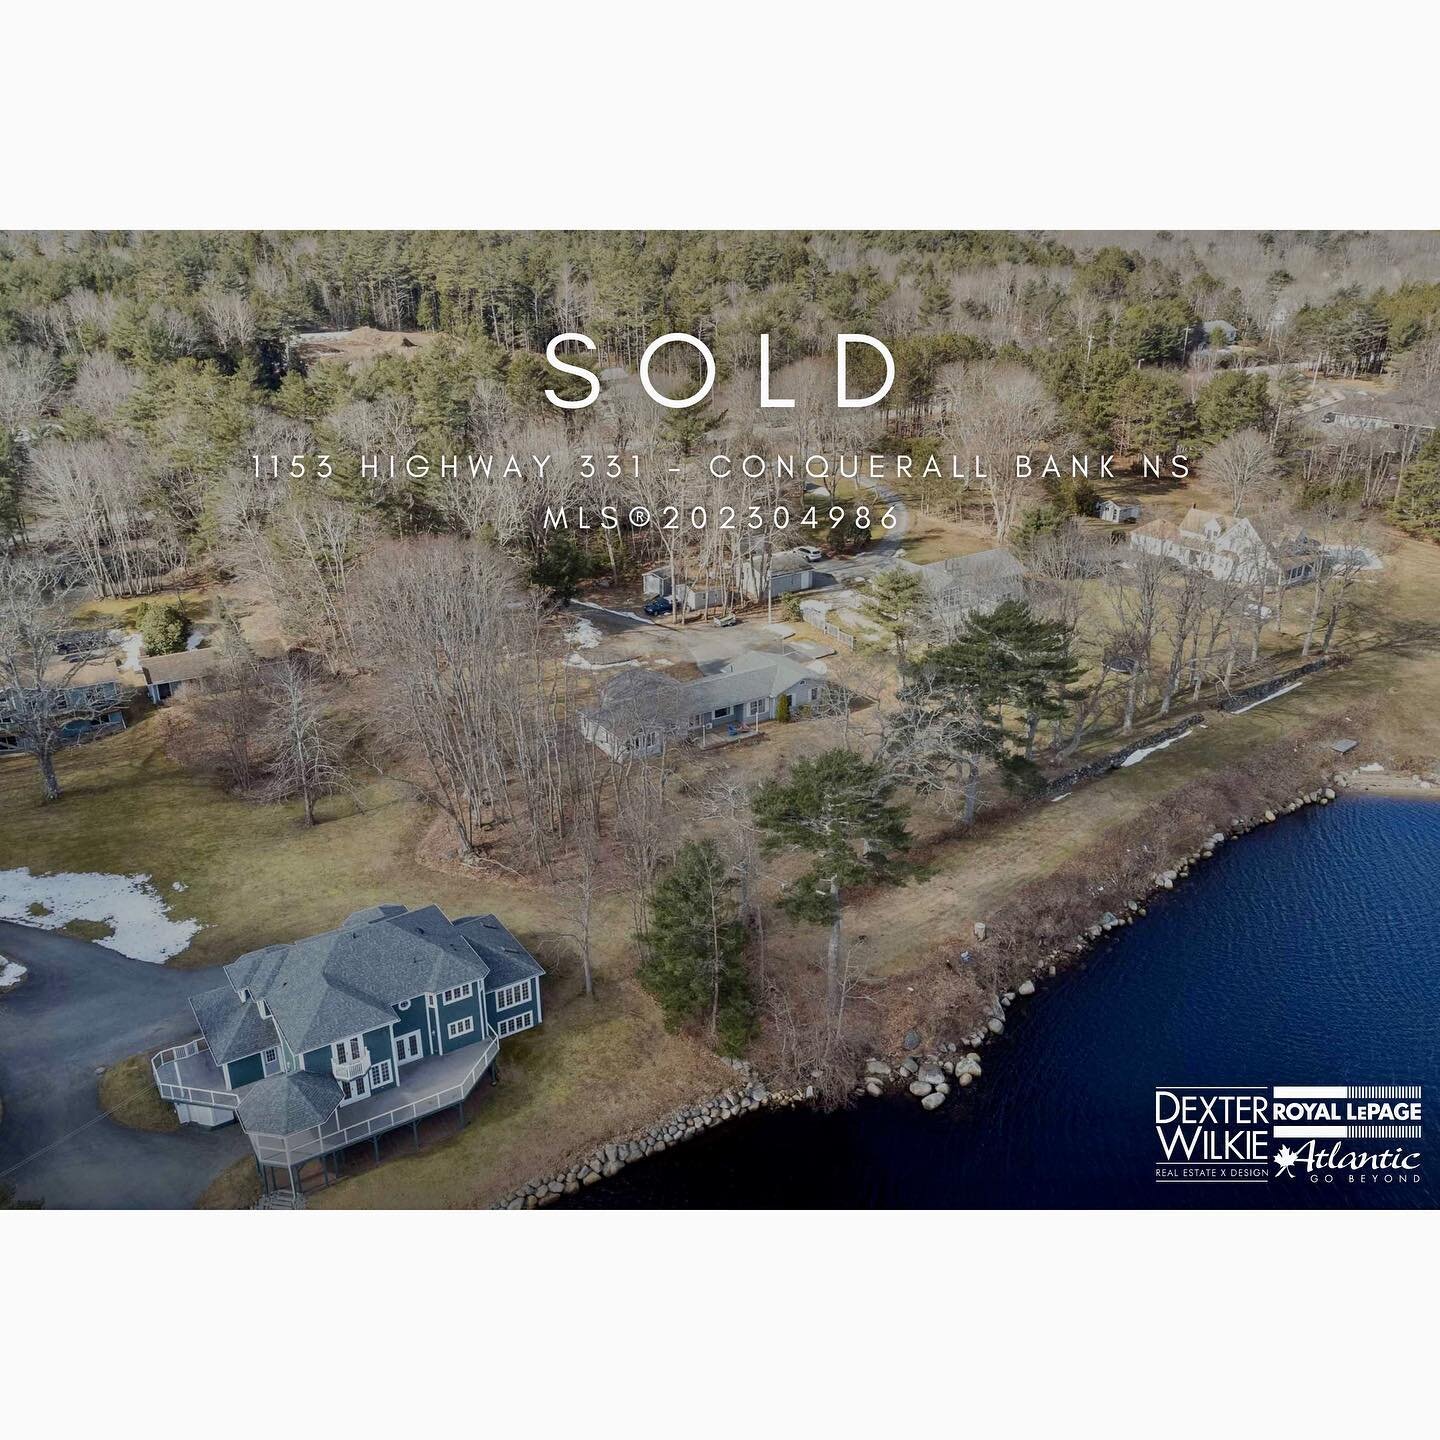 Sitting on the wonderful #LahaveRiver in beautiful #ConquerallBank #NovaScotia, I am thrilled for my buyers to call this special property home 🏡

Thank you to @markthatsold &amp; @cheriyoung1972 for bringing this beautiful listing to market and for 